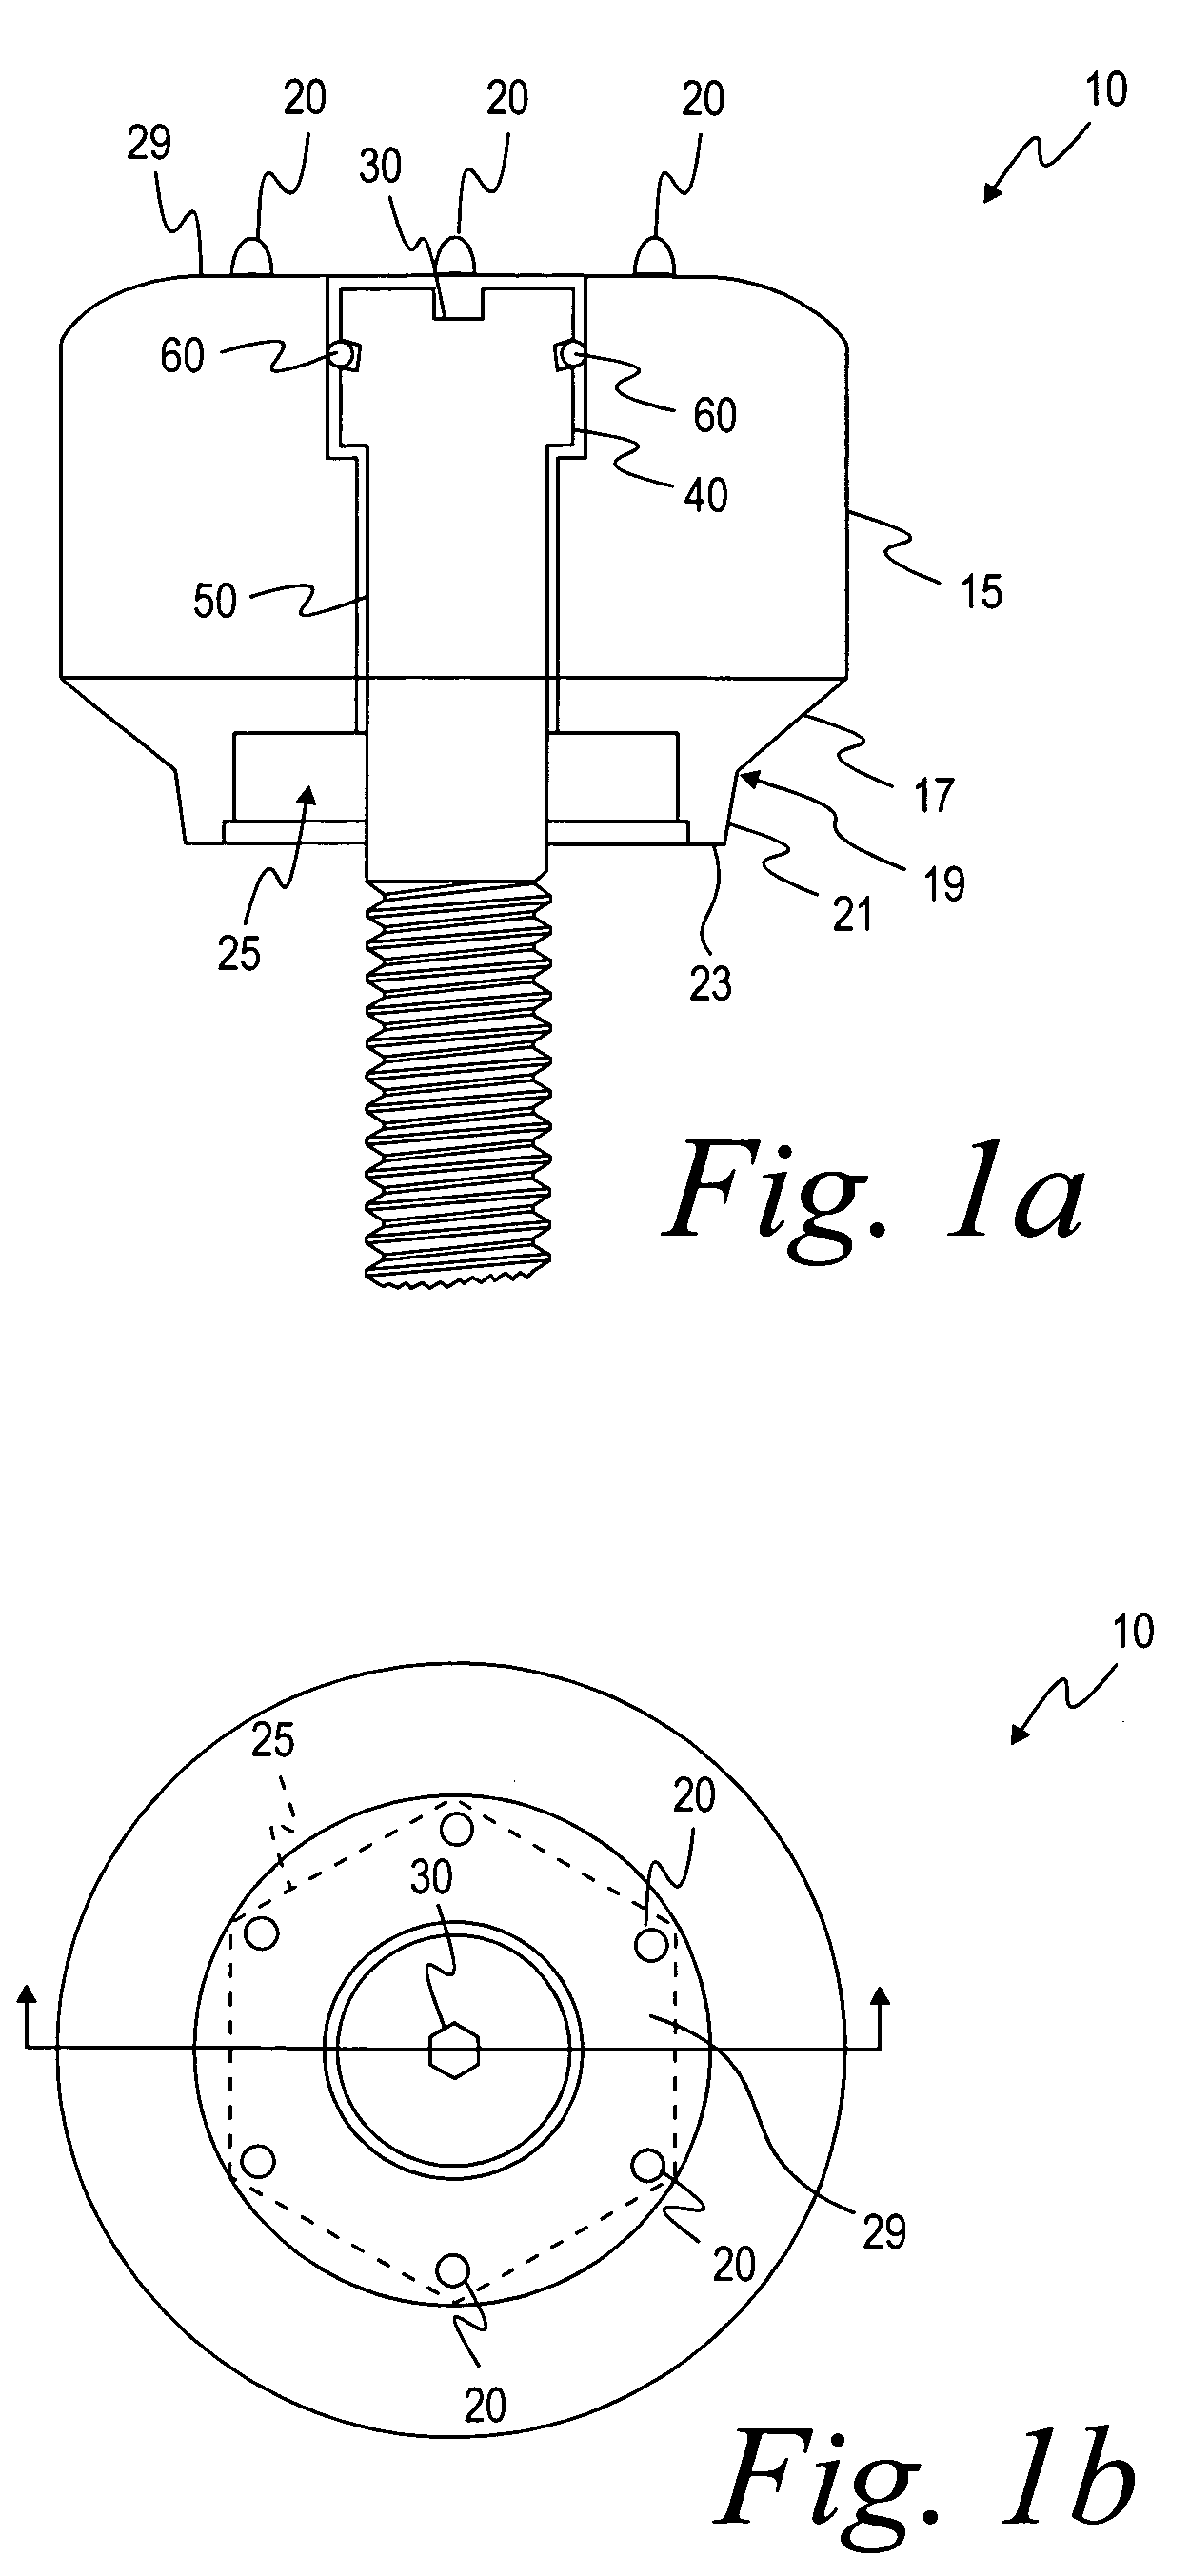 Methods for manufacturing dental implant components